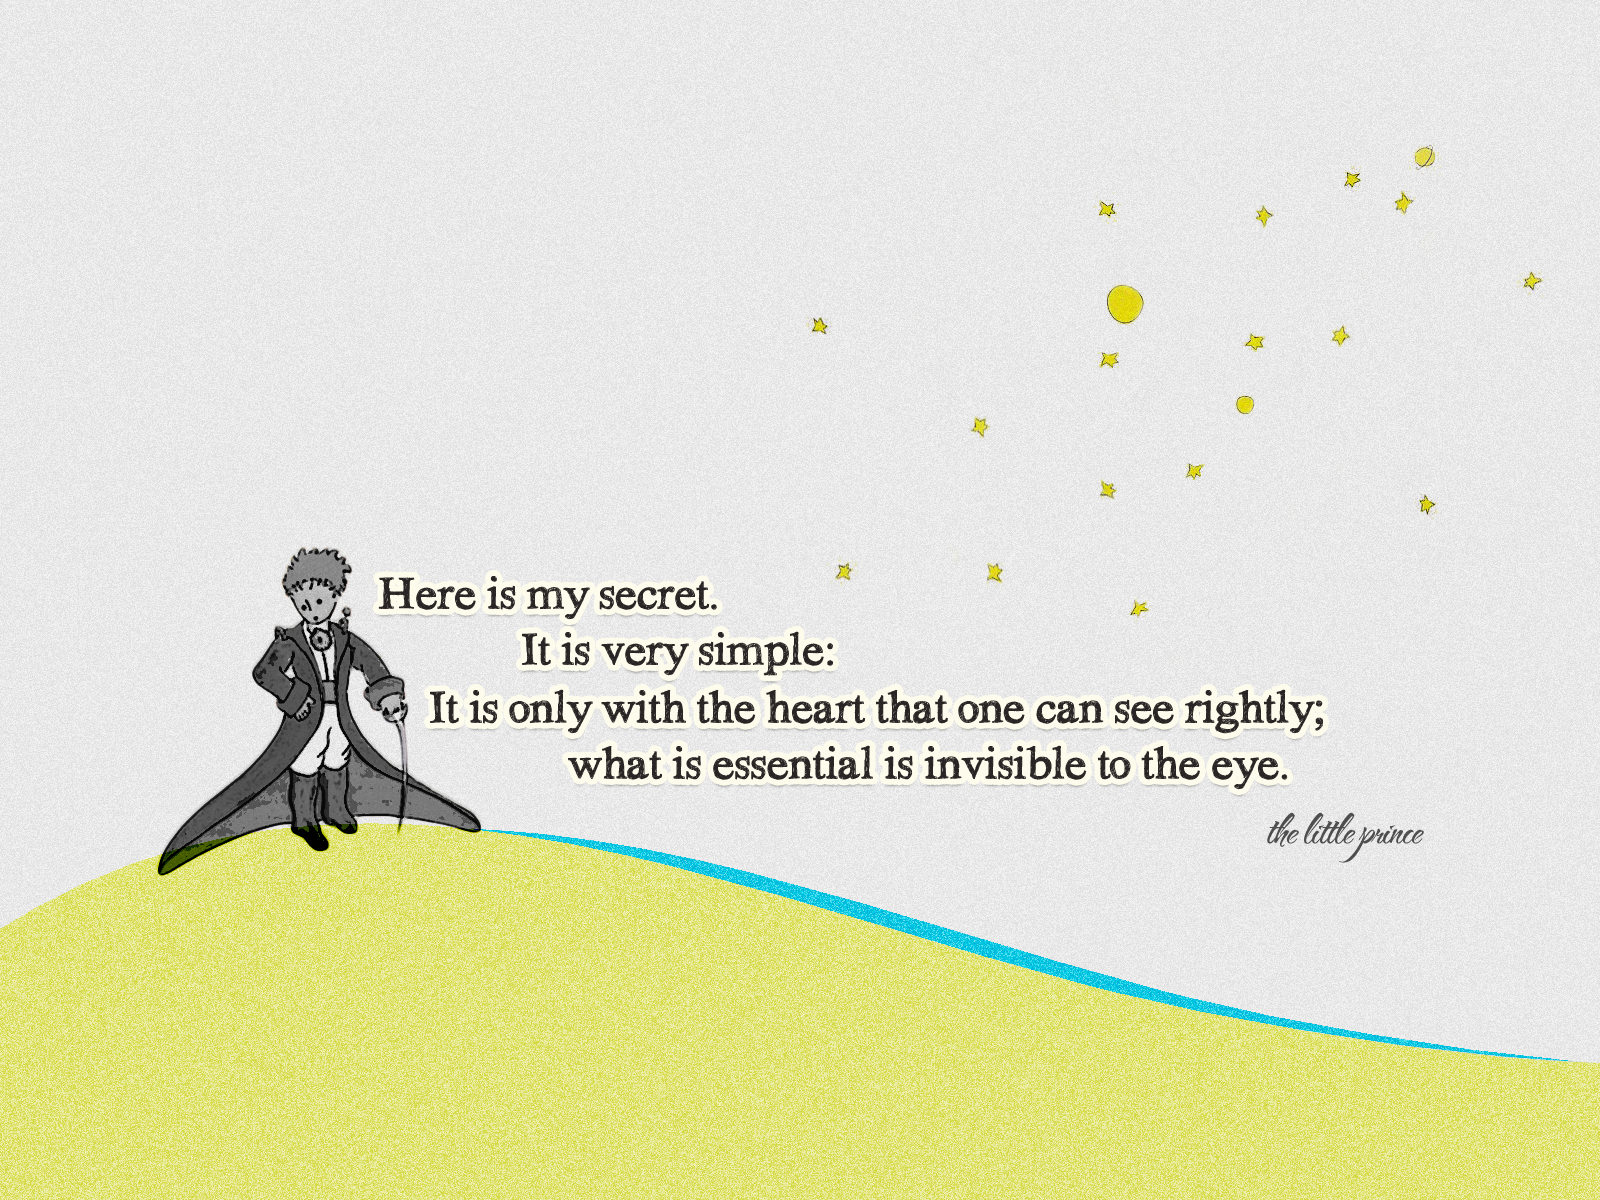 The Little Prince - Man Repeller